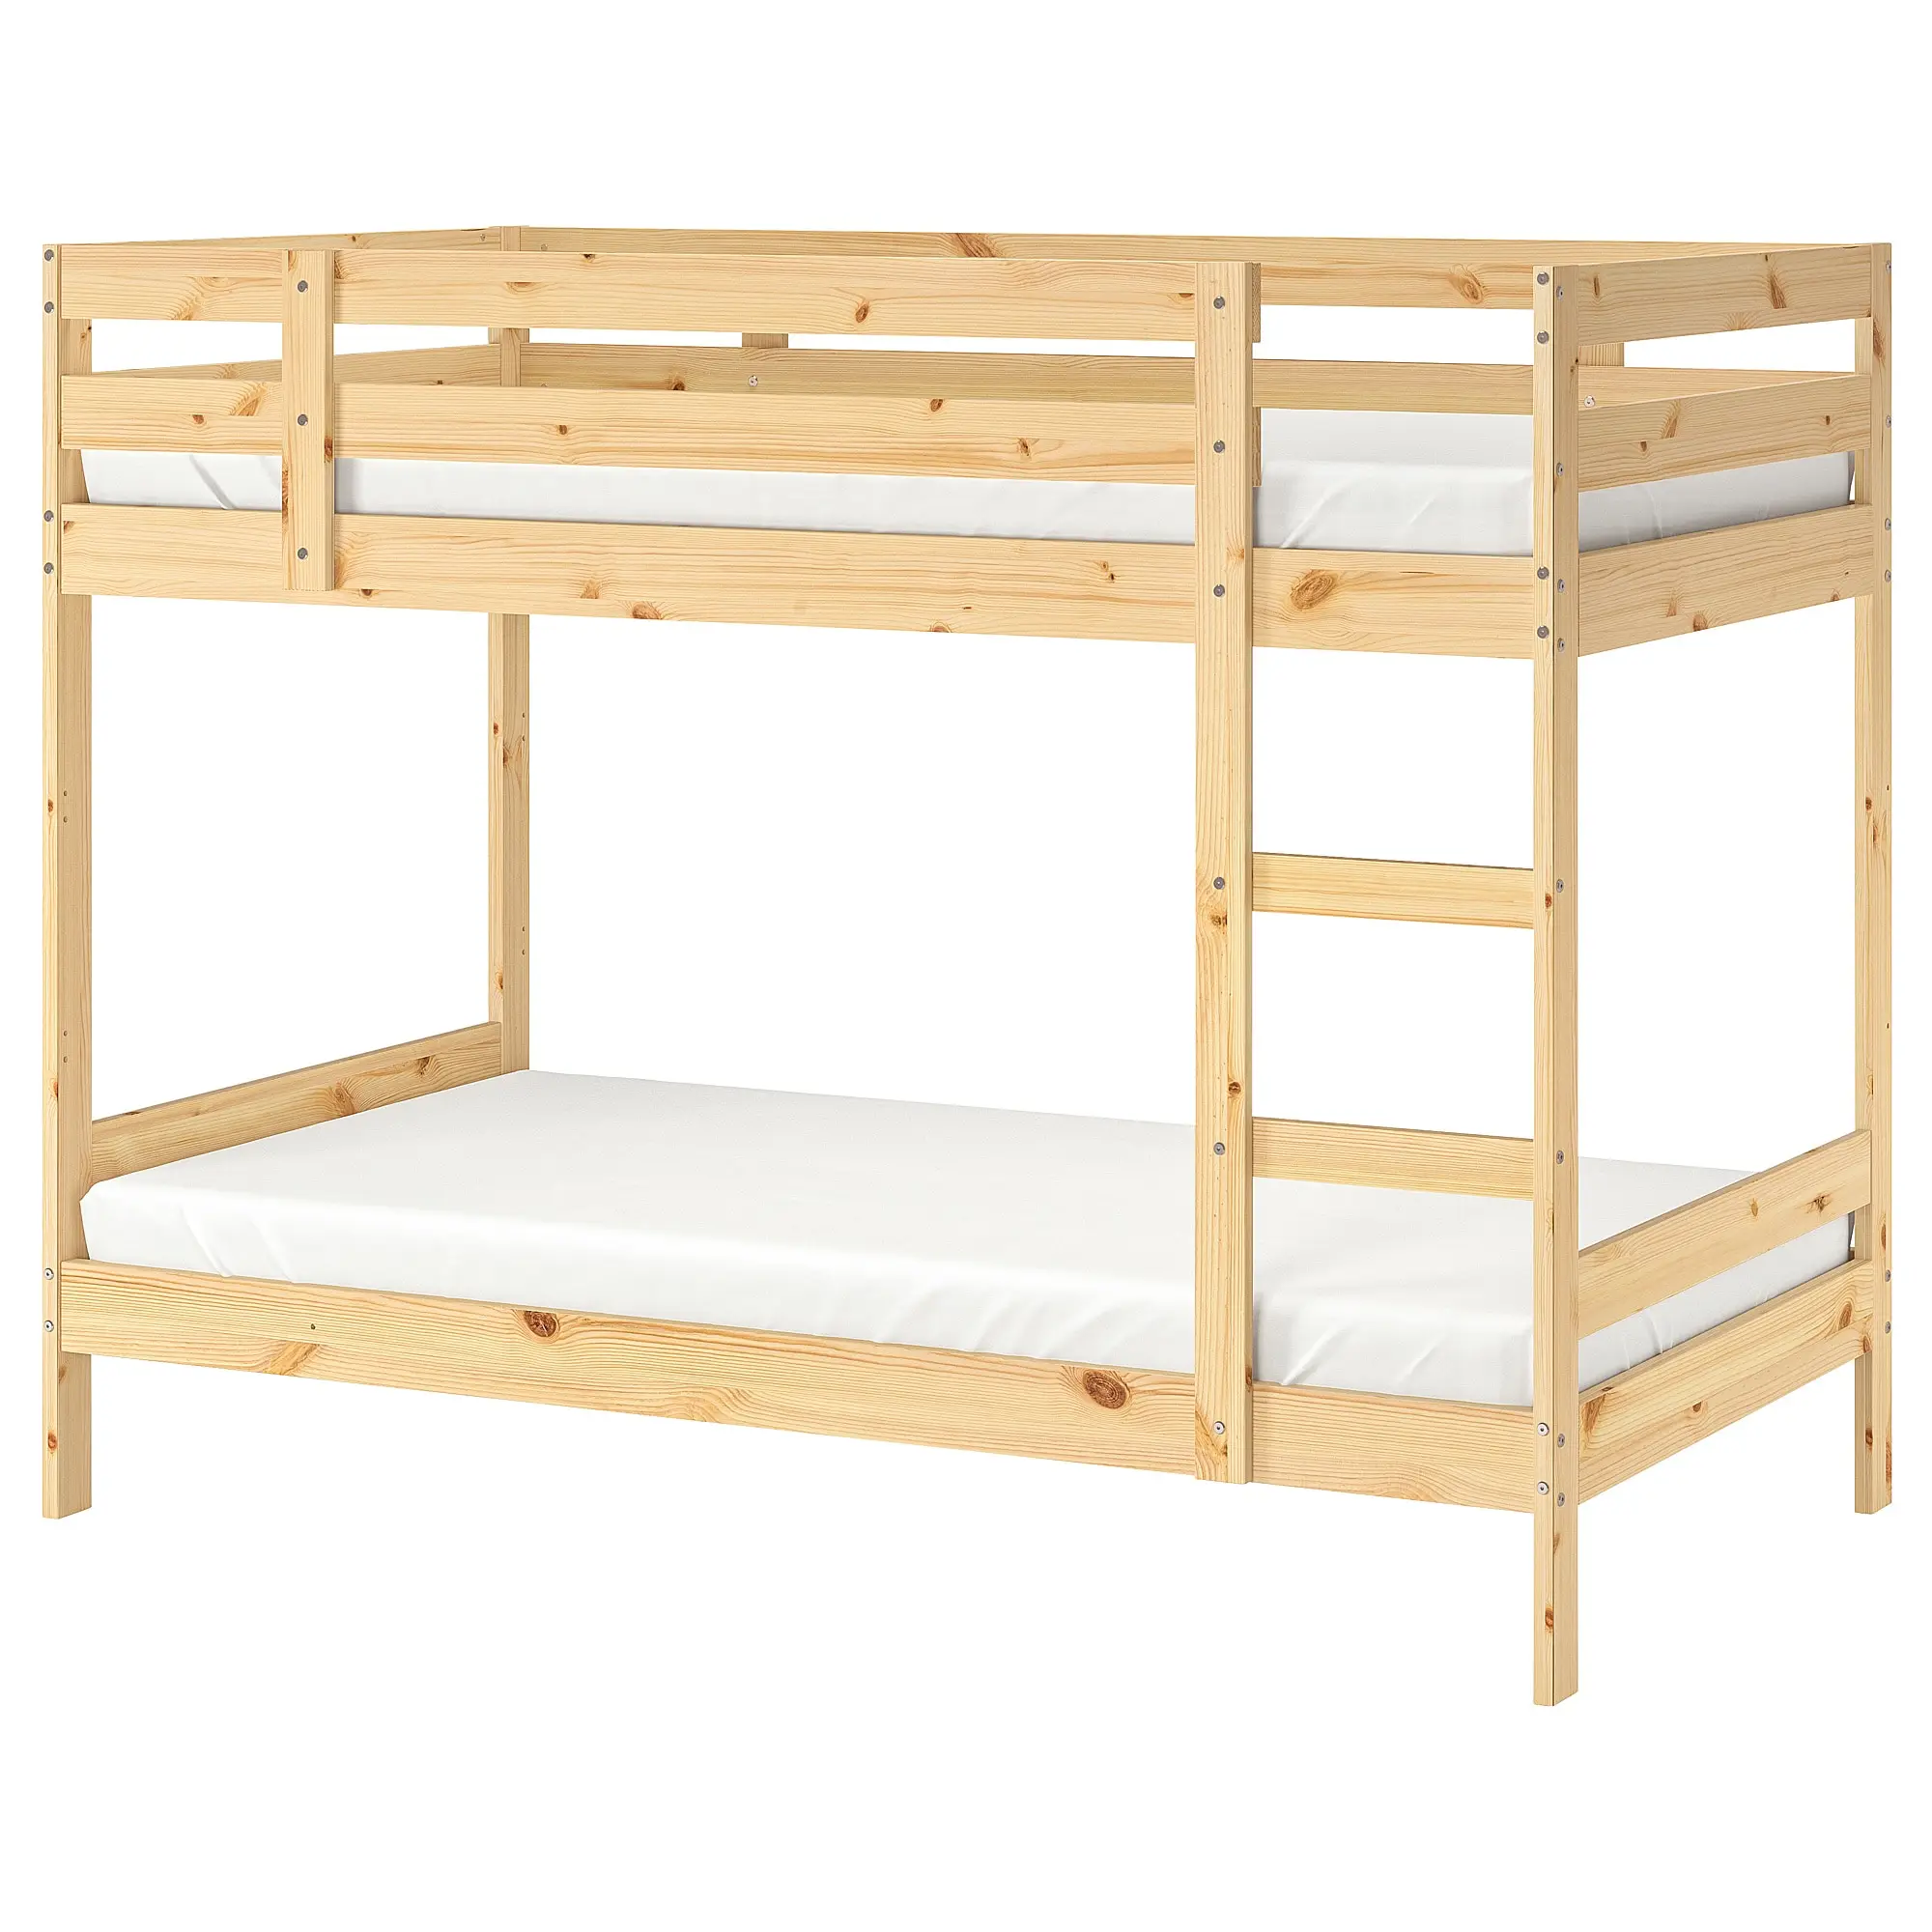 Premium Quality Furniture Slick Twin Over Full Bunk Bed With Slide